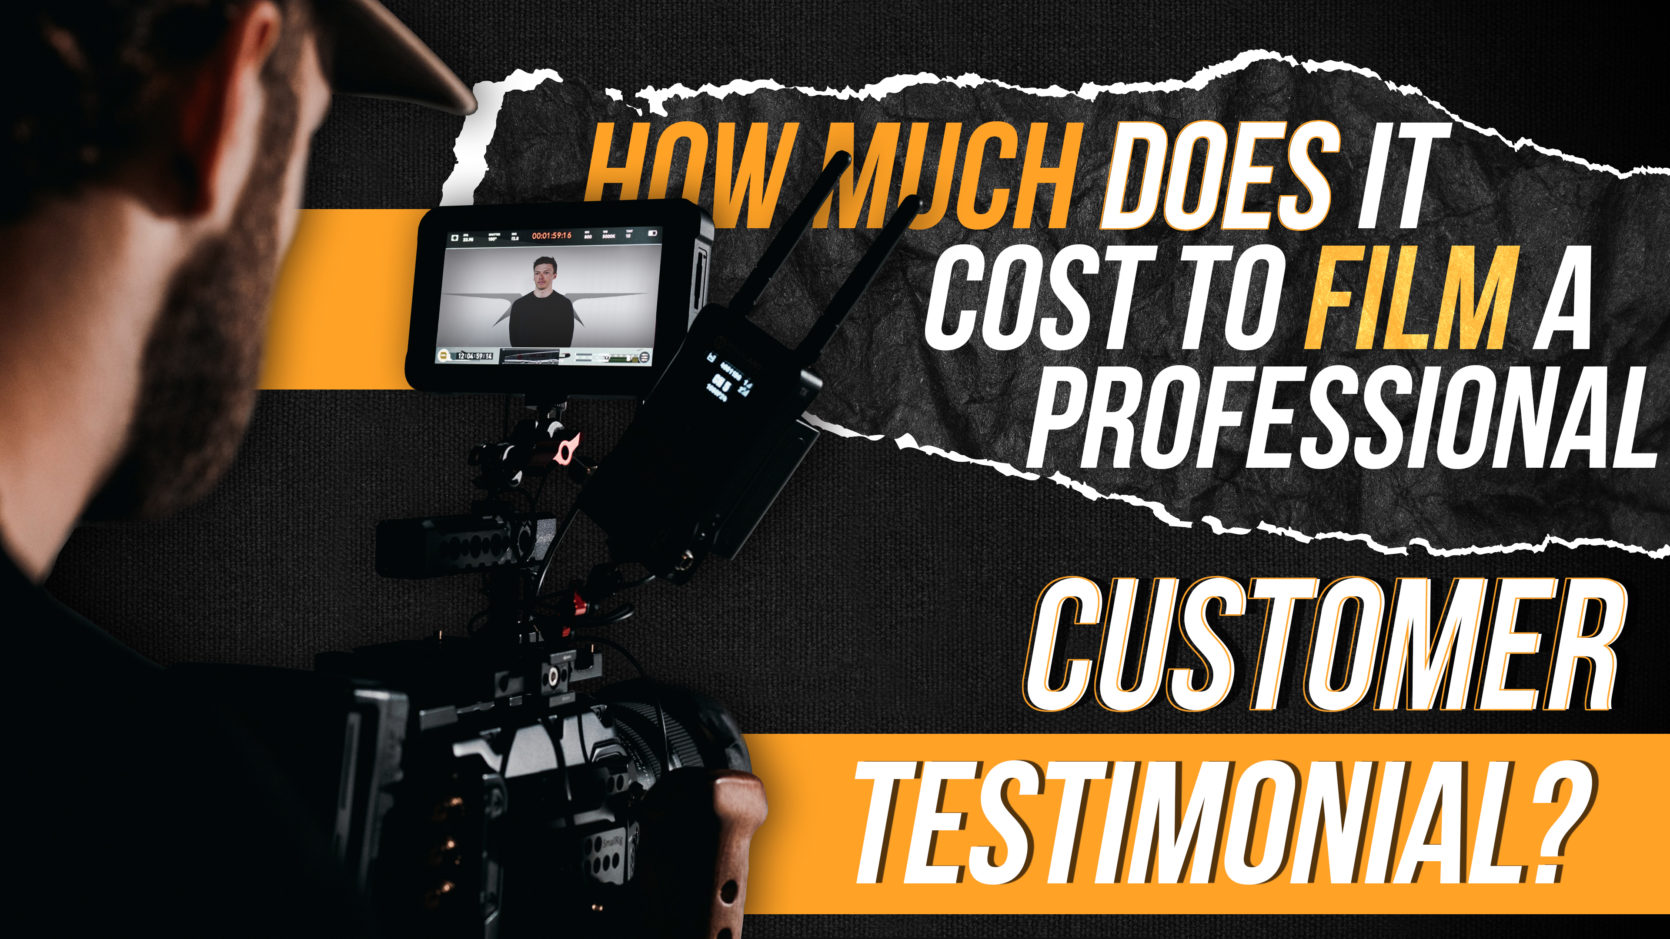 How Much Does It Cost to Film a Professional Customer Testimonial